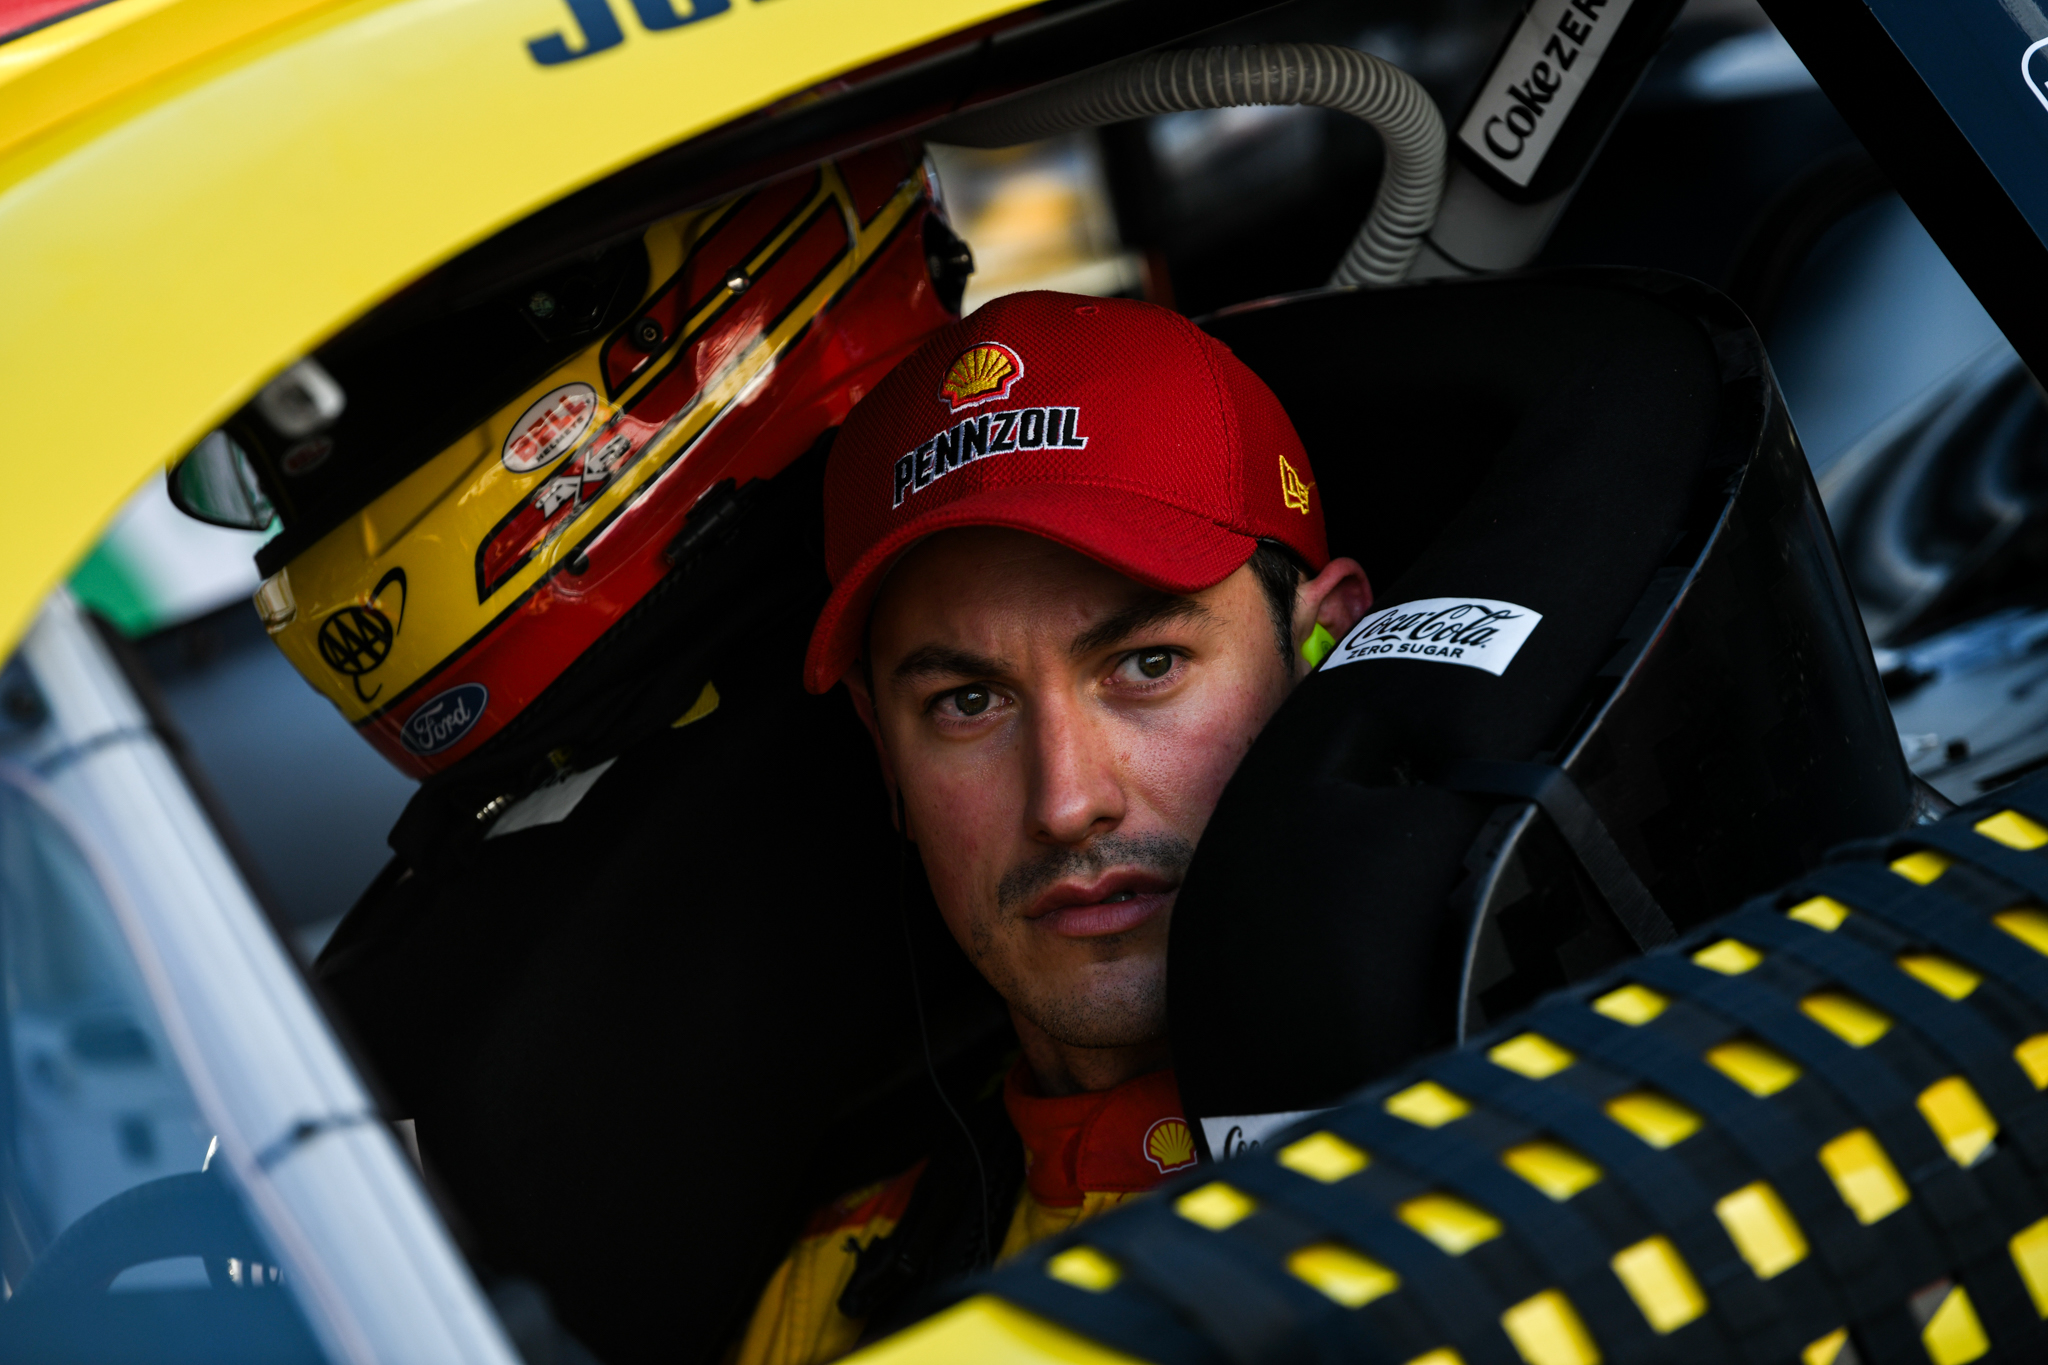 Joey Logano Starts 28th in Pursuit of Timely Bristol Win